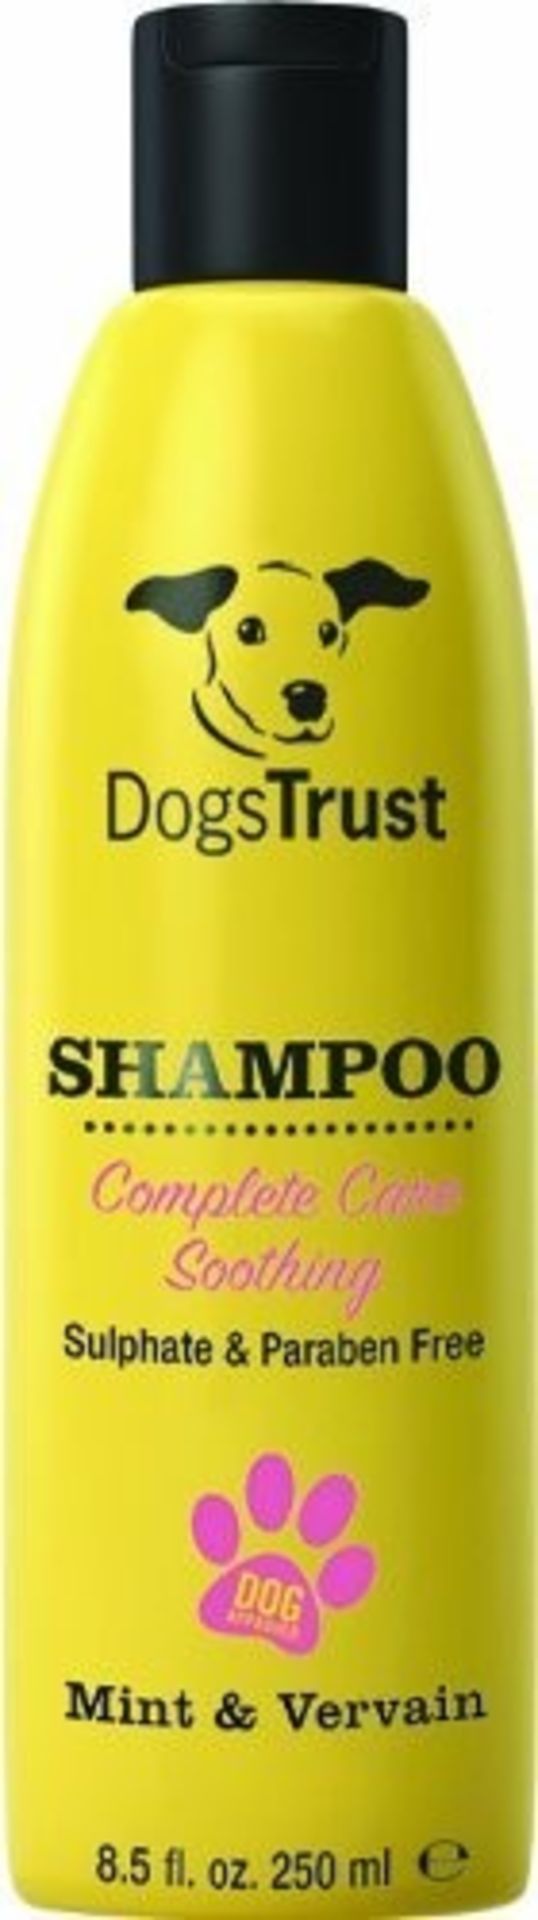 60 x Various Dogs Trust Shampoos and Conditioners - Brand New Stock - CL028 - Includes No Tears, - Image 13 of 15